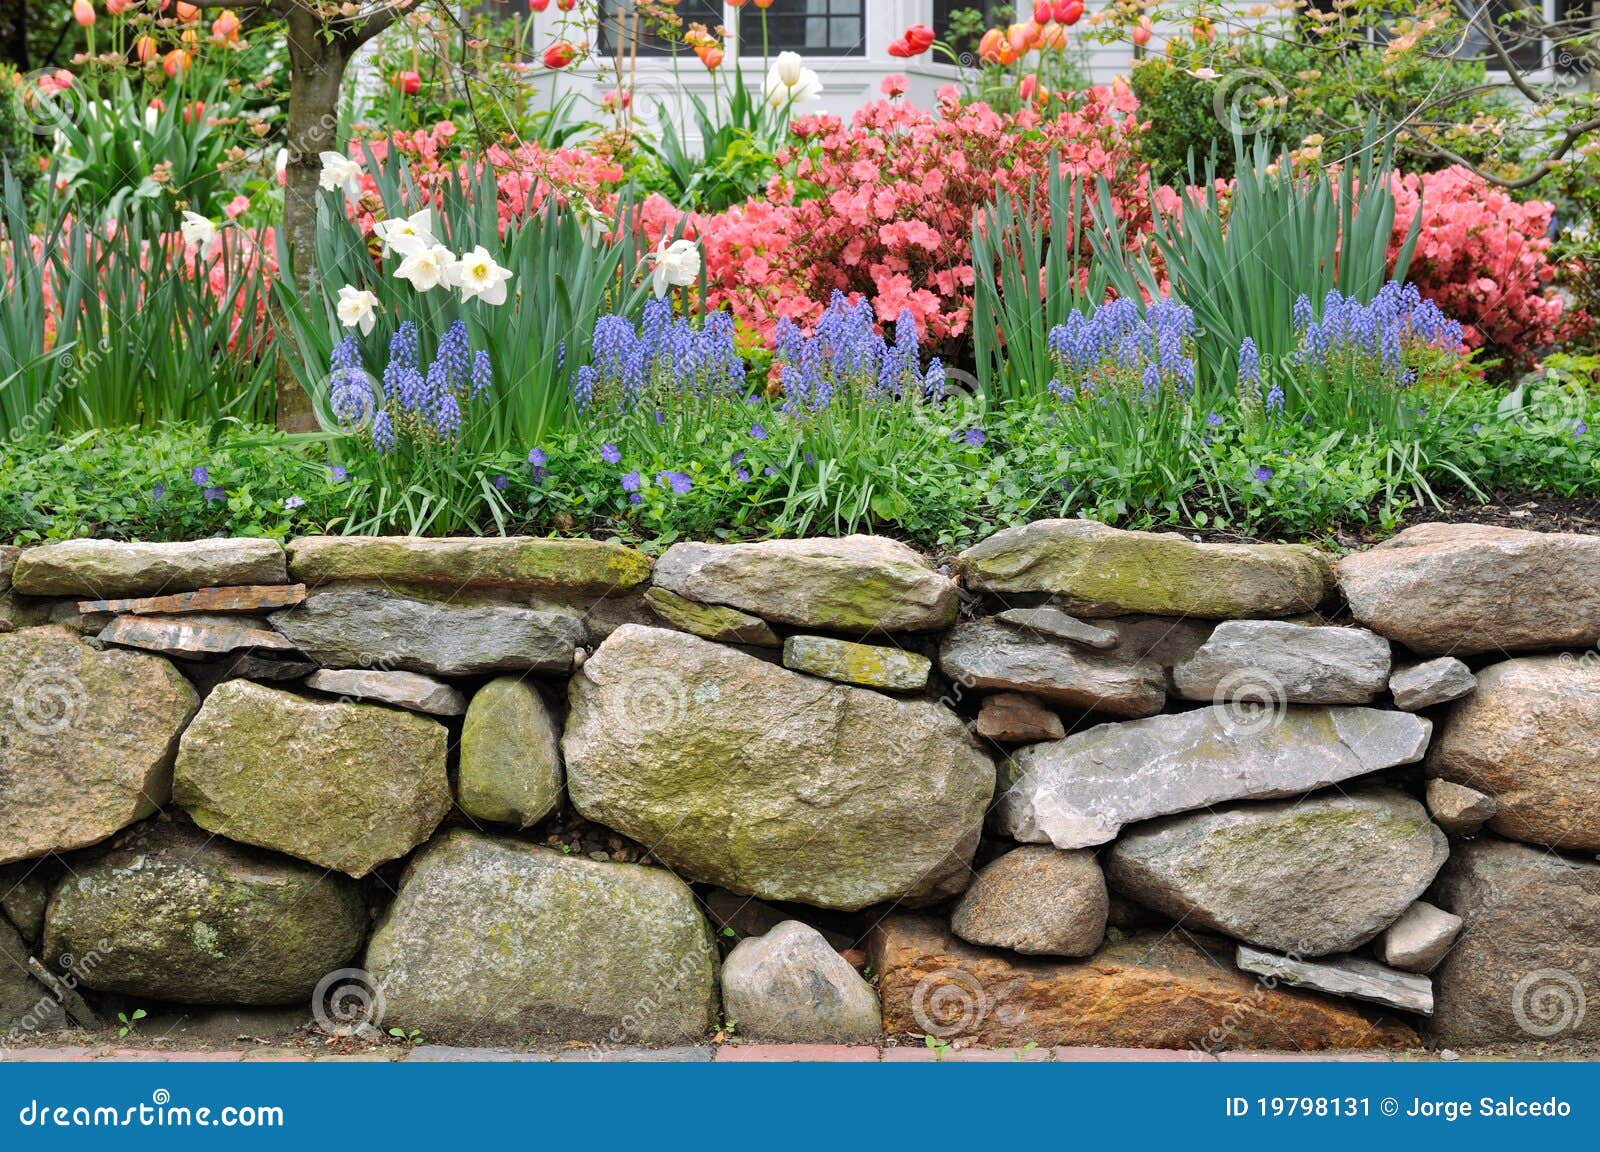 Dry Stone Wall And Colorful Garden Stock Image - Image: 19798131